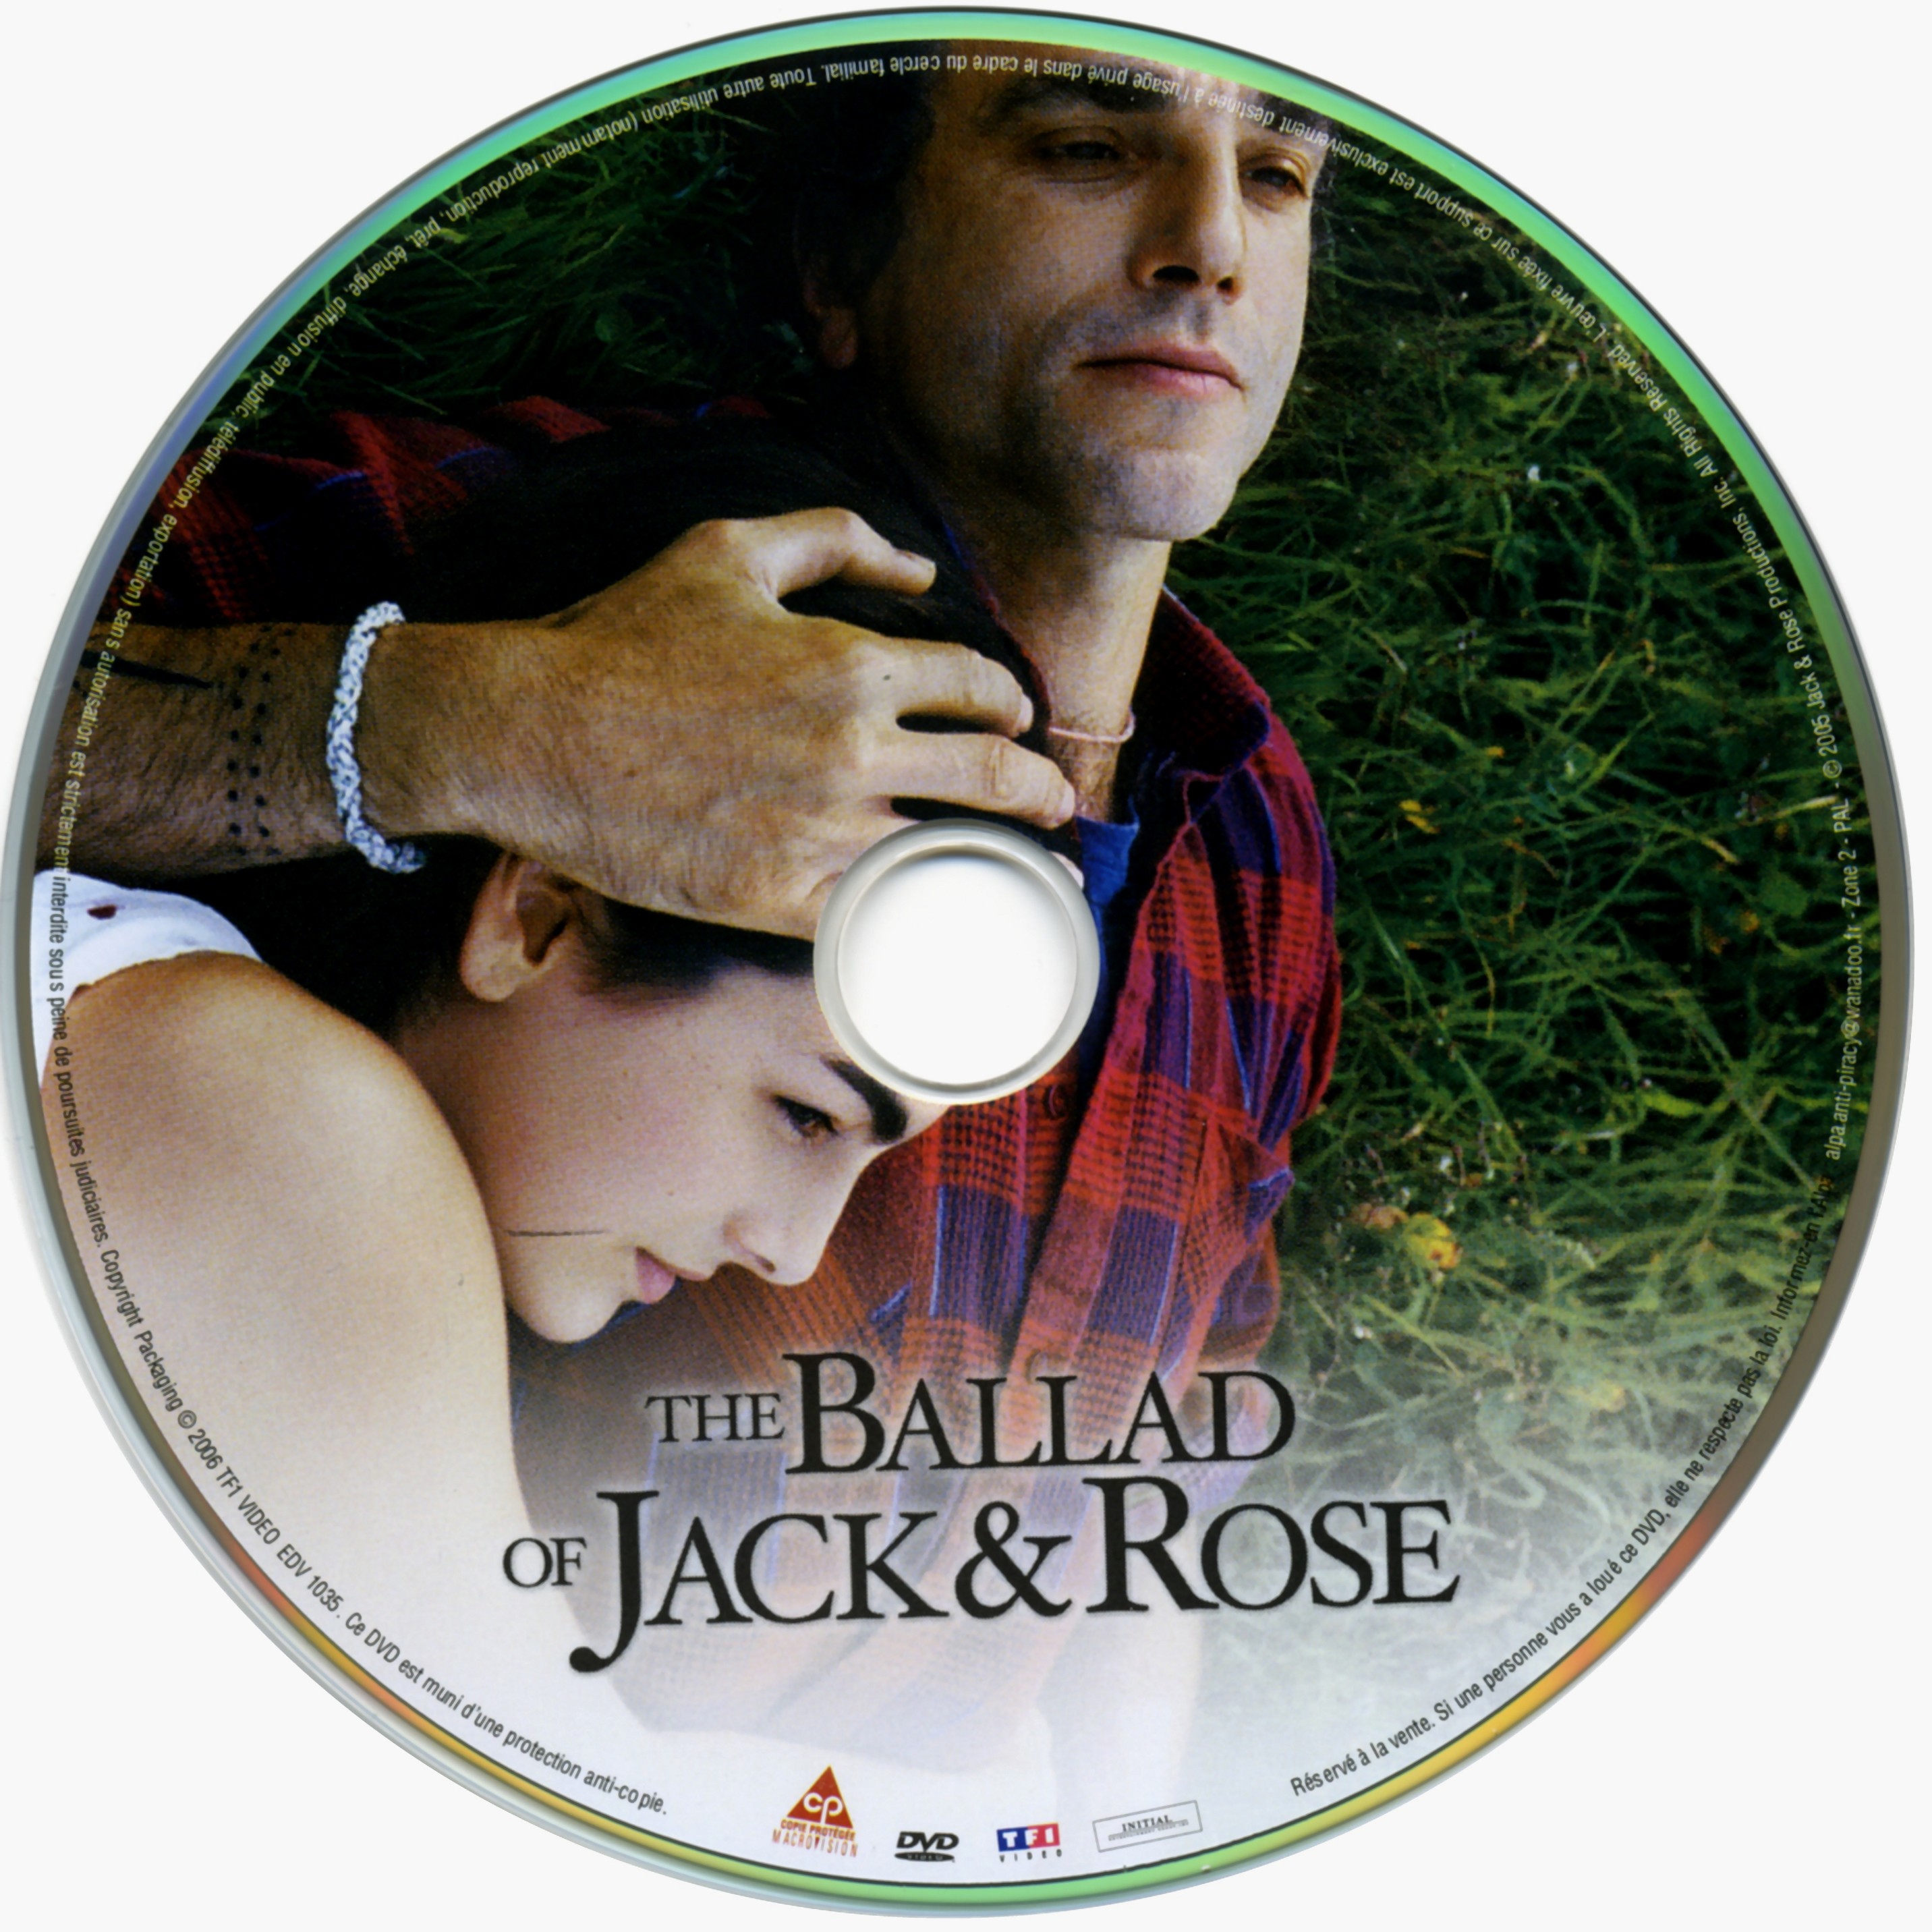 The ballad of Jack and Rose